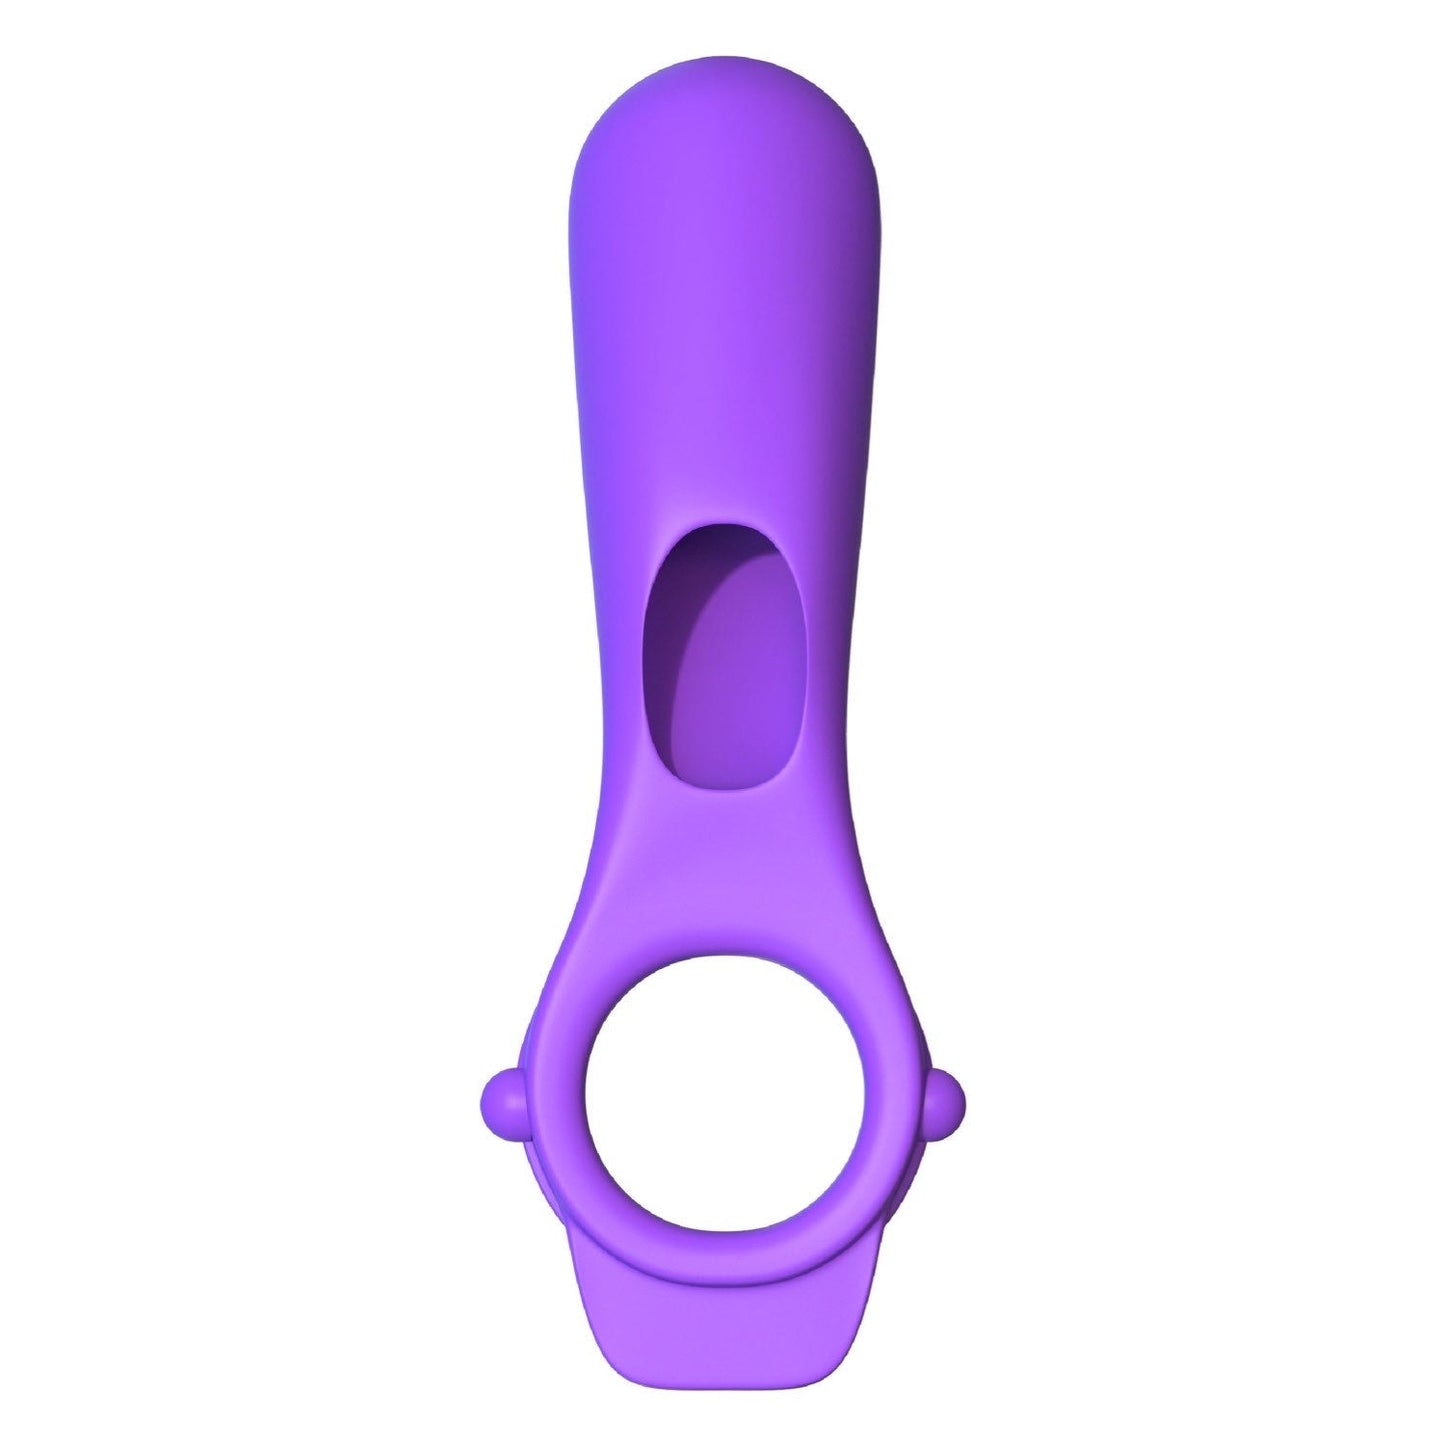 Fantasy C-ringz Ride N' Clide Couples Ring - Purple Vibrating Cock Ring